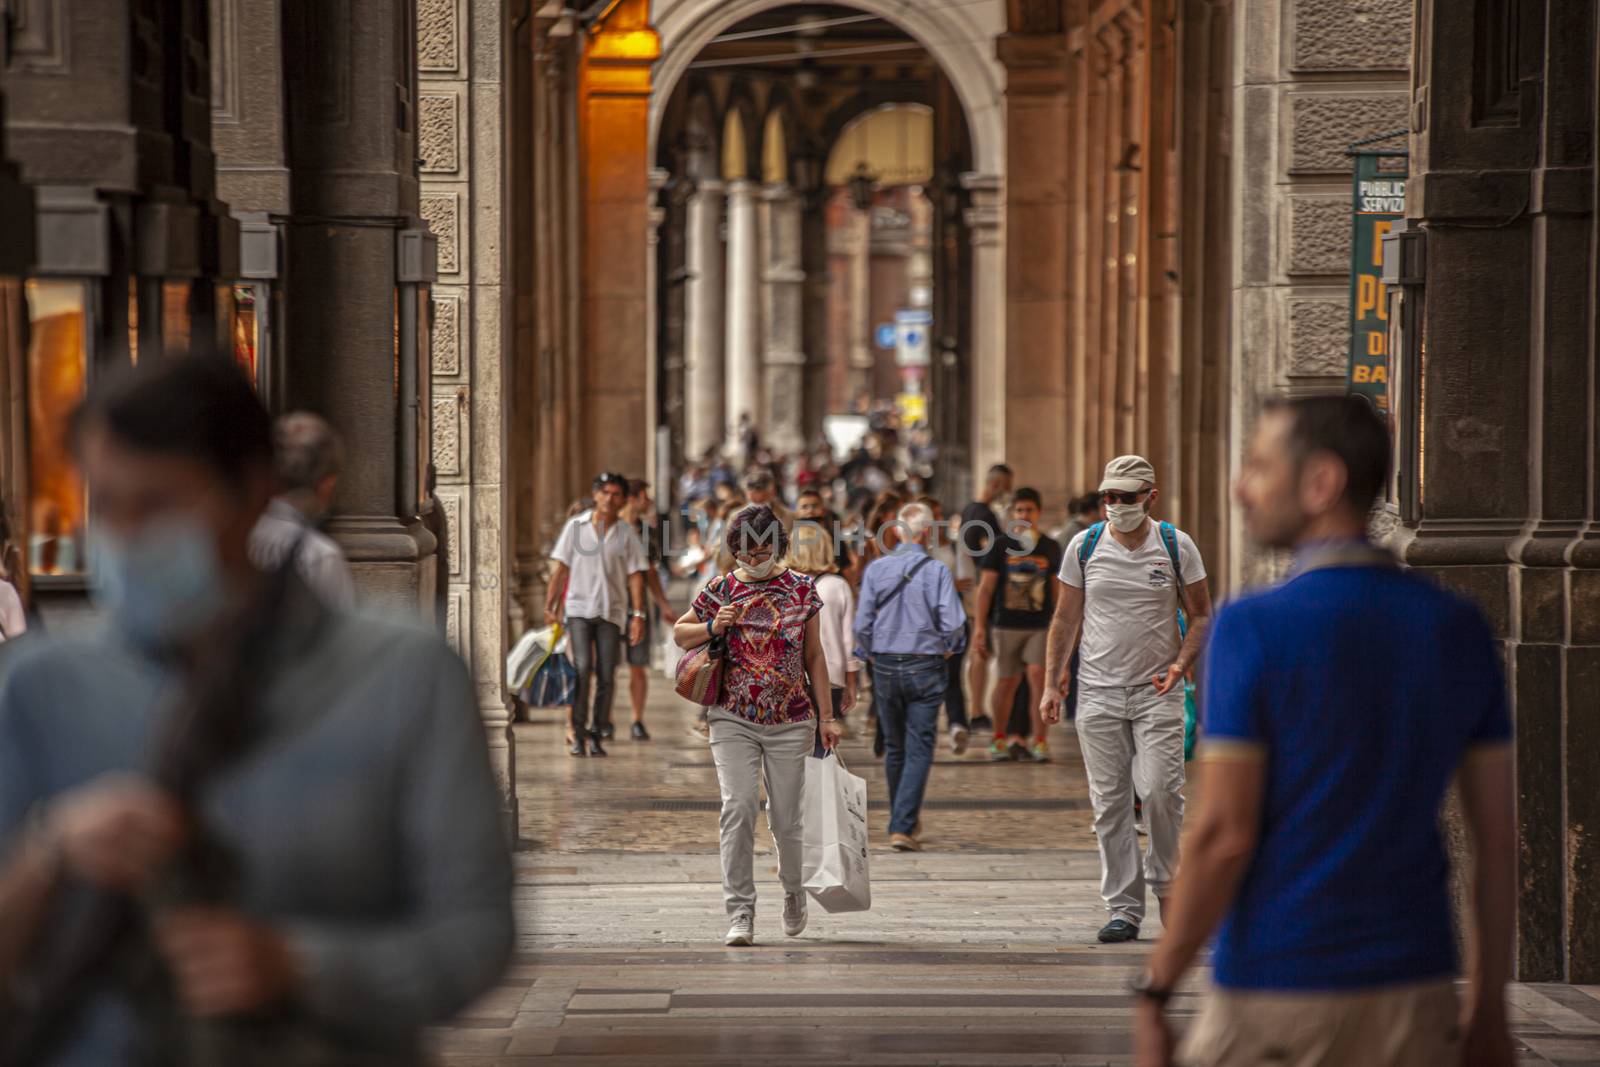 People walking under arcades in Bologna, Italy 3 by pippocarlot